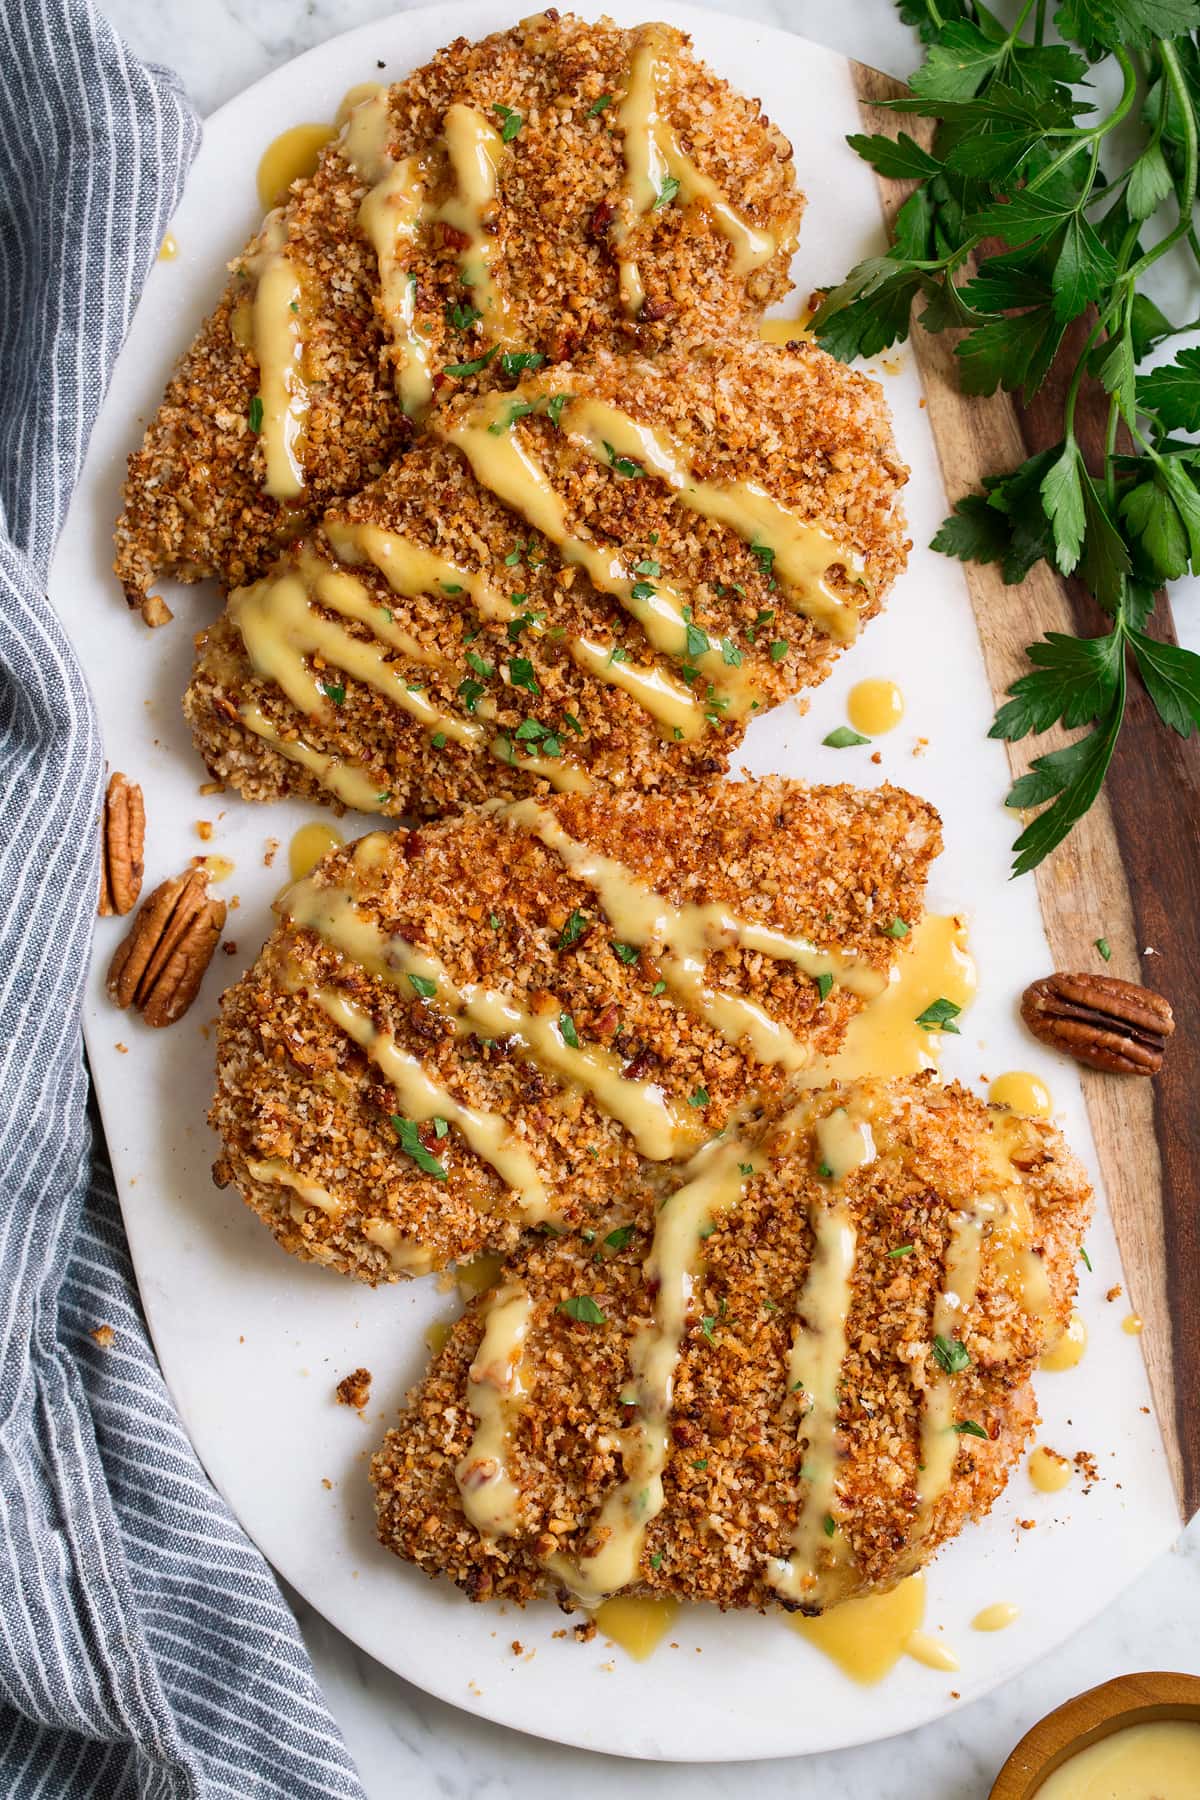 Chicken with pecan and panko breadcrumbs on a marble serving platter. Chicken is drizzled with honey mustard sauce.